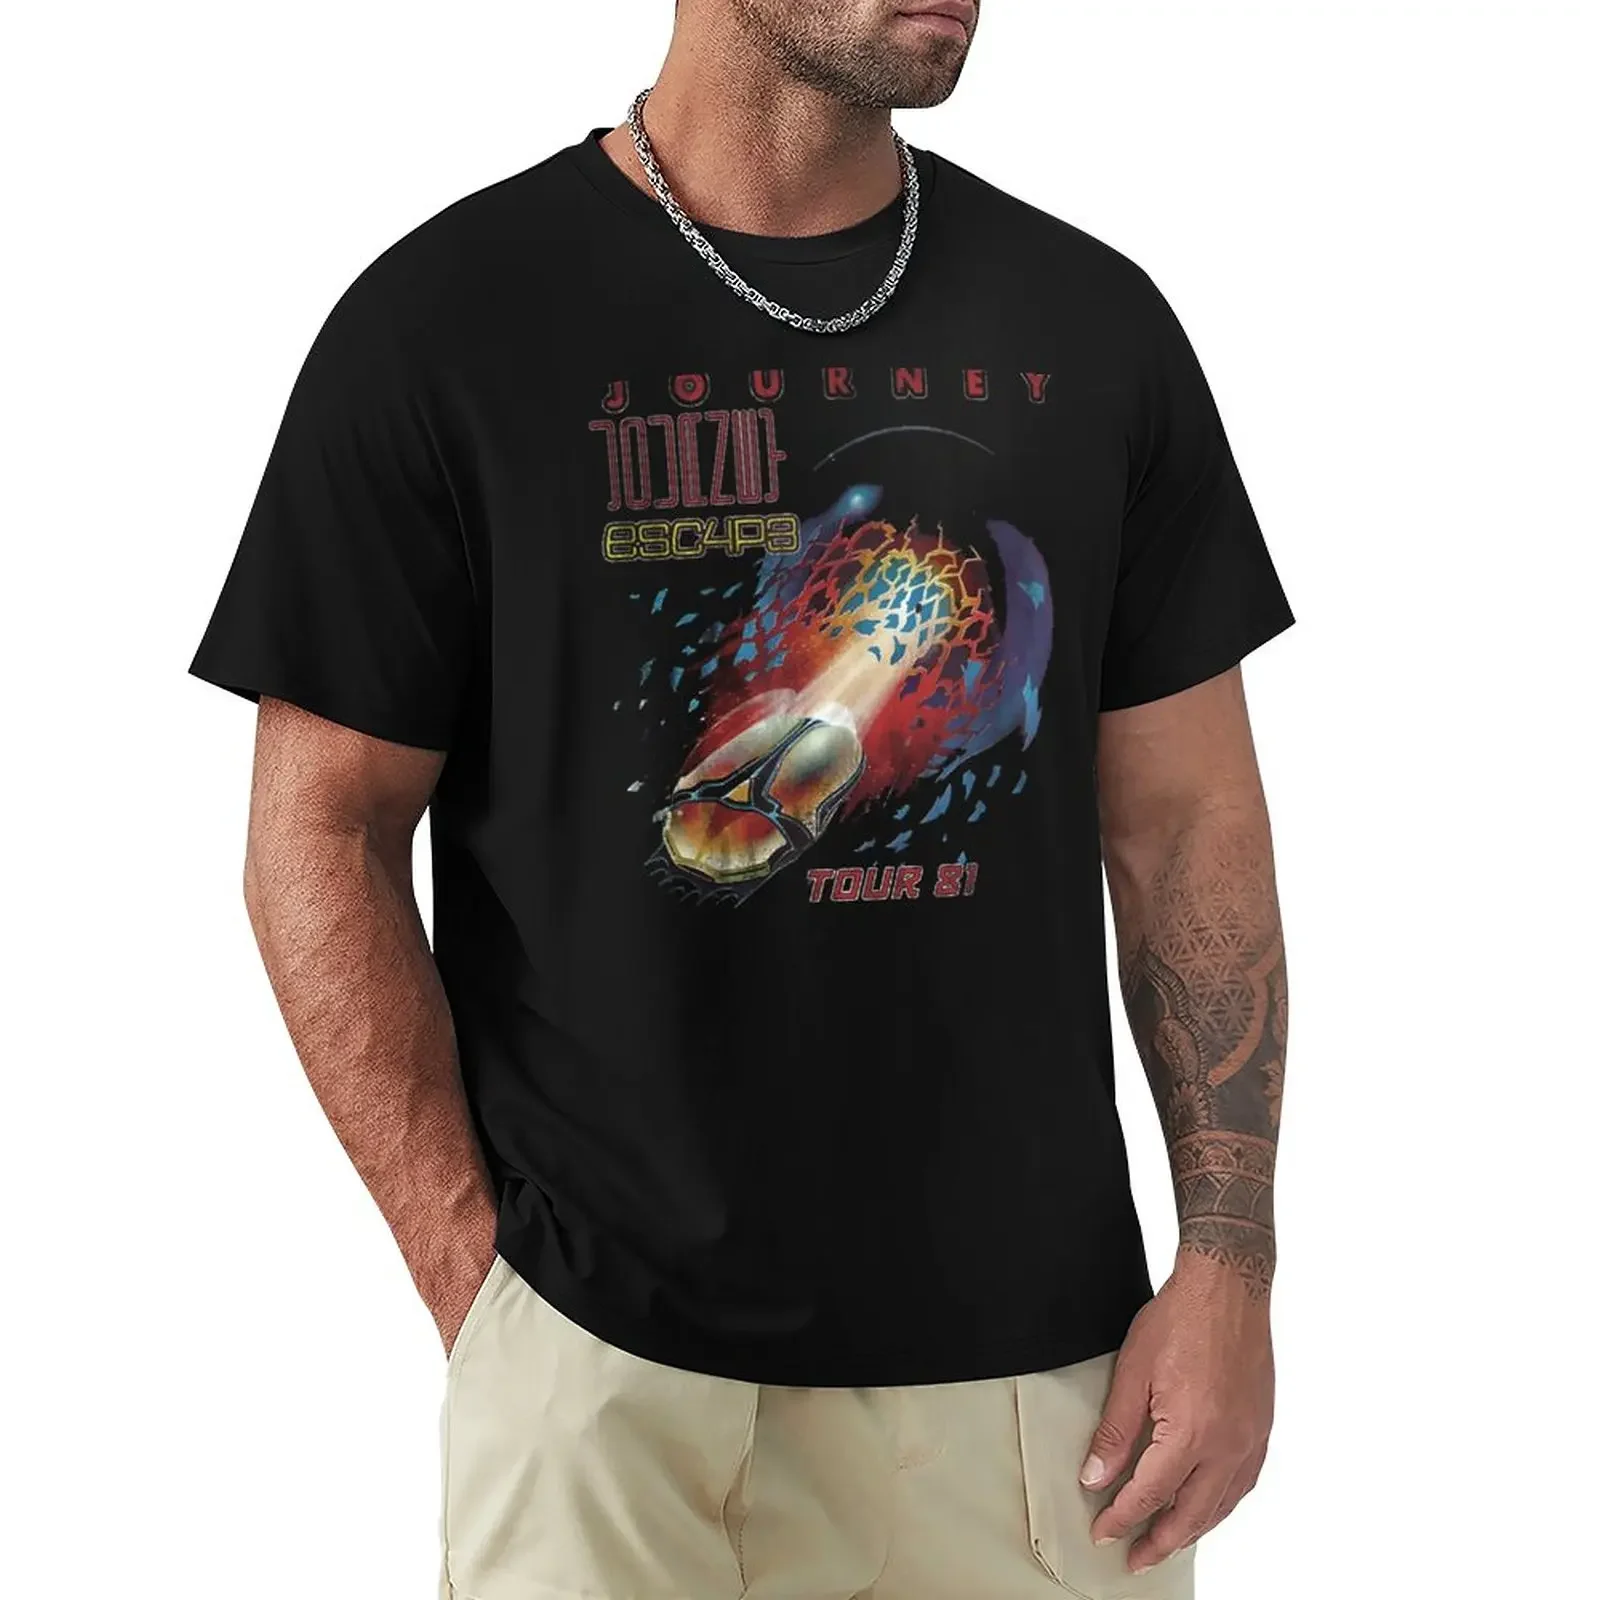 

Journey Escape Tour T-Shirt oversizeds customizeds oversized mens graphic t-shirts big and tall